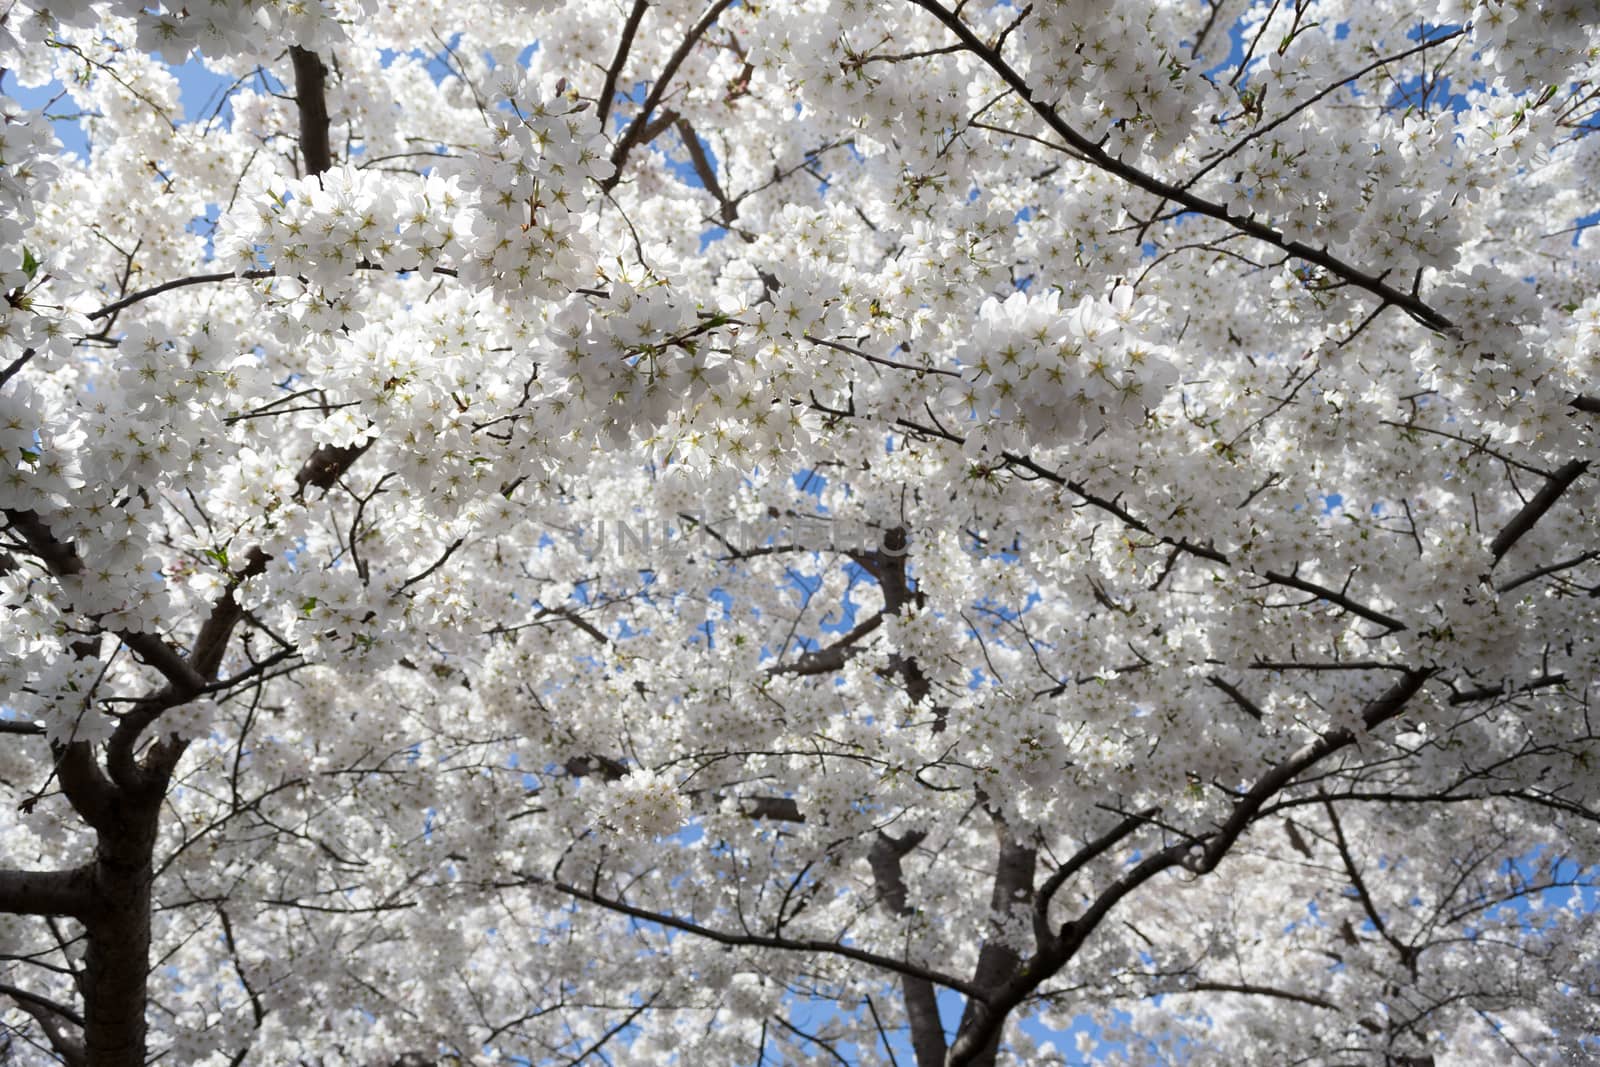 The National Cherry Blossom festival is a spring celebration in Washington DC. It started in 1912 when the Mayor of Tokyo (Yukio Ozaki) gave these Japanese Cherry trees to the City of Washington.